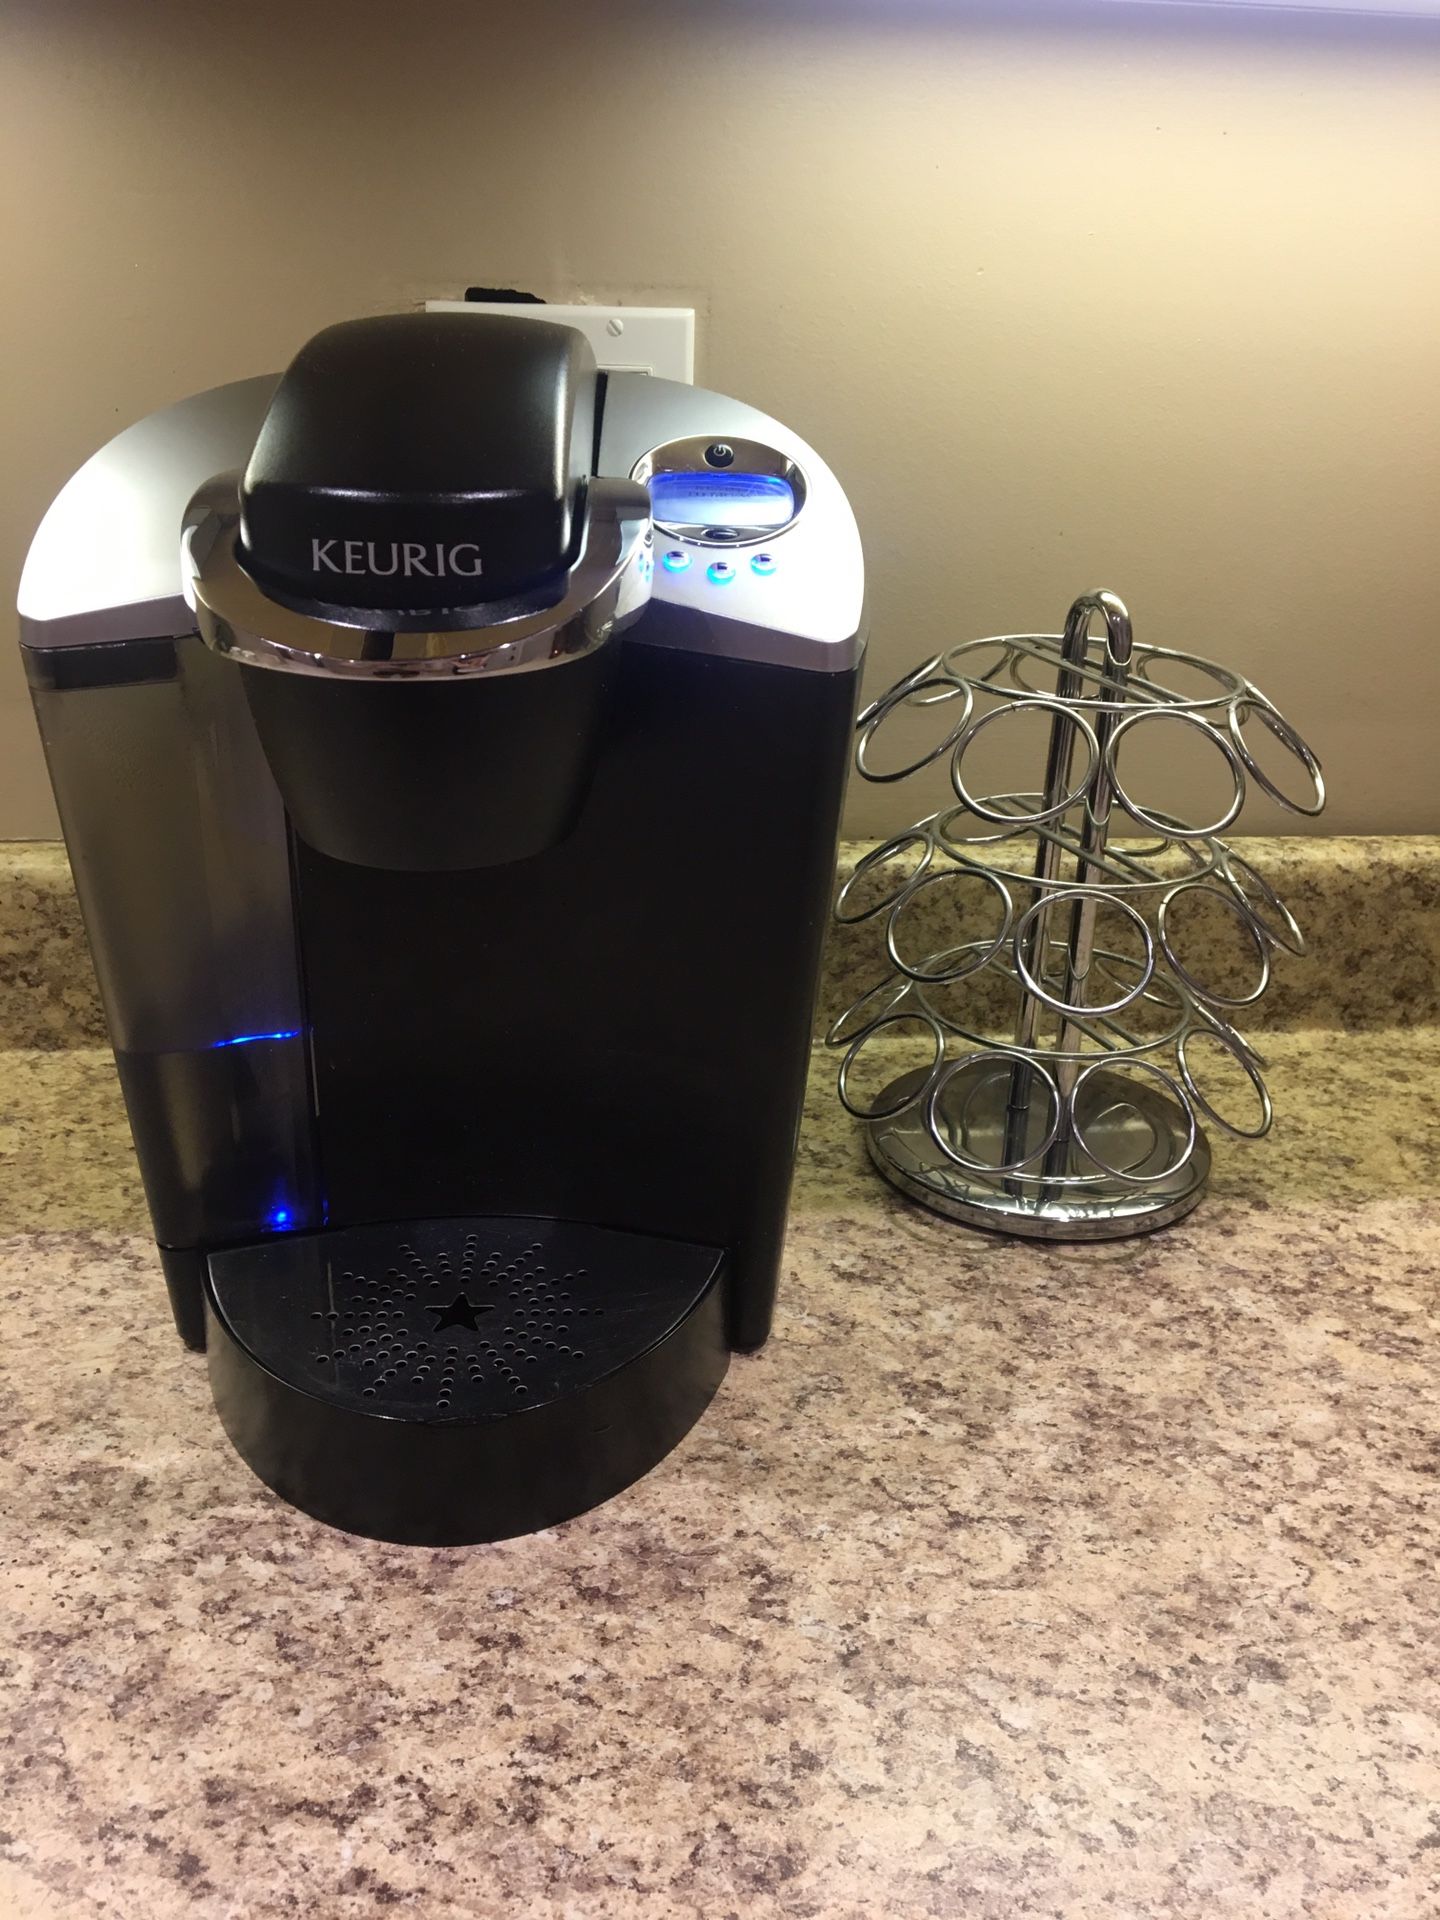 KEURIG COFFEE MAKER WITH C-cup stand